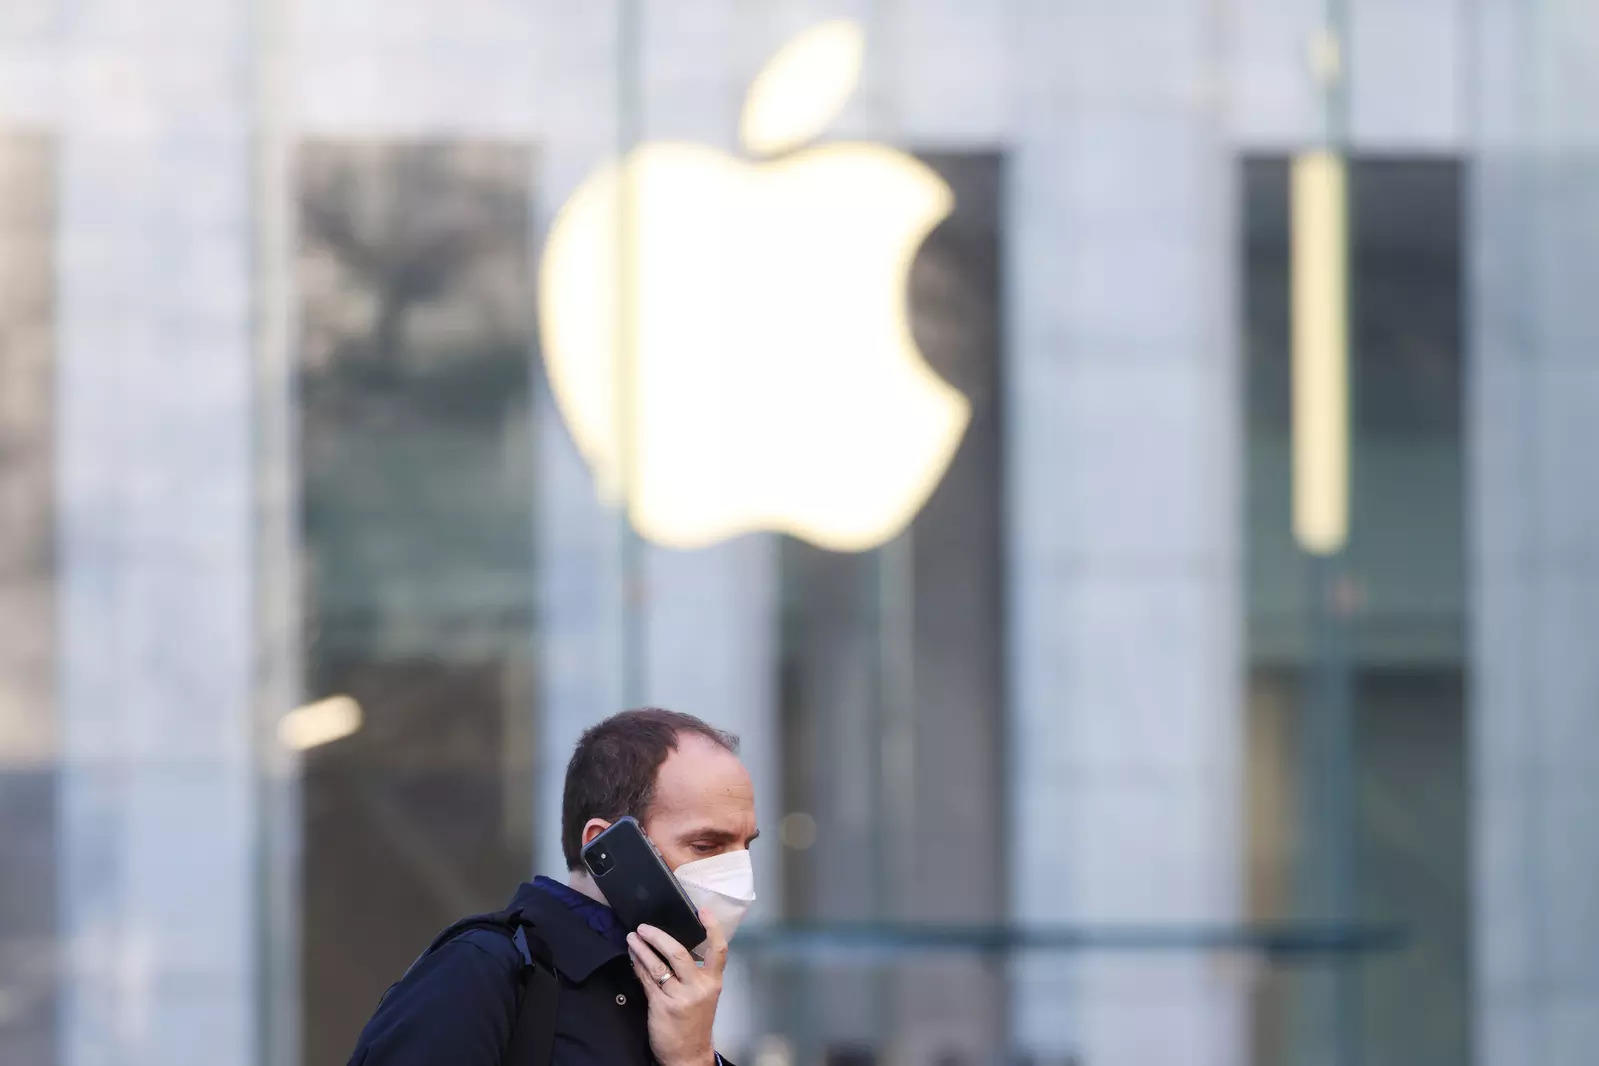  FILE PHOTO: A person uses smartphone near an Apple Store in Manhattan, New York City, U.S., February 11, 2022. REUTERS/Andrew Kelly